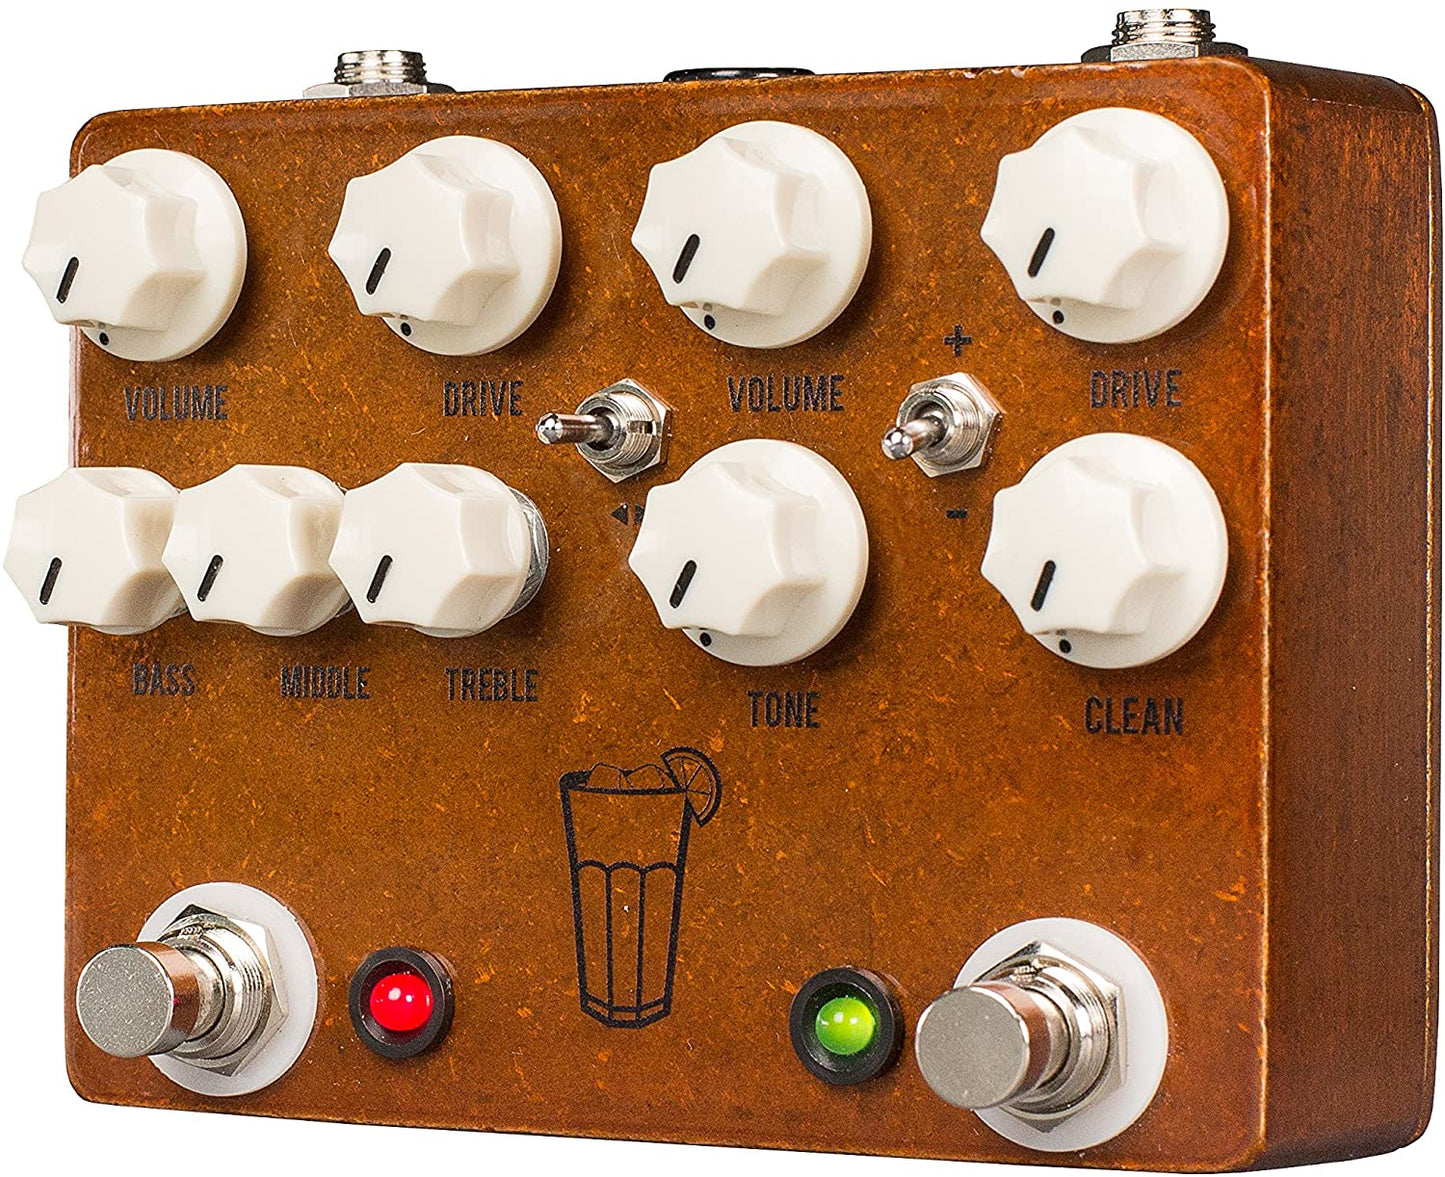 JHS Sweet Tea V3 2-in-1 Overdrive Guitar Effects Pedal